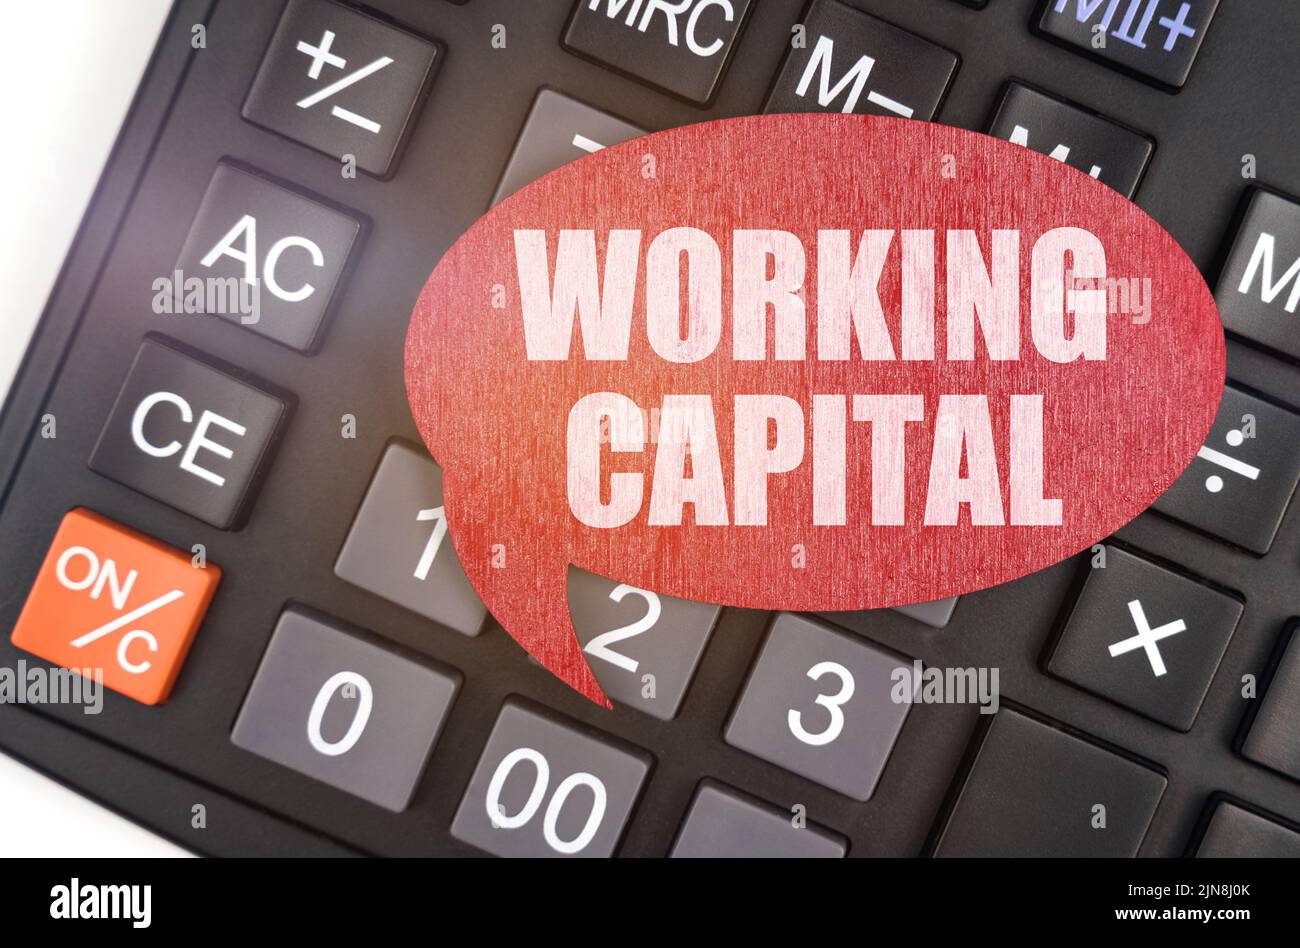 Business and finance concept. There is a red plaque on the calculator that says - WORKING CAPITAL Stock Photo